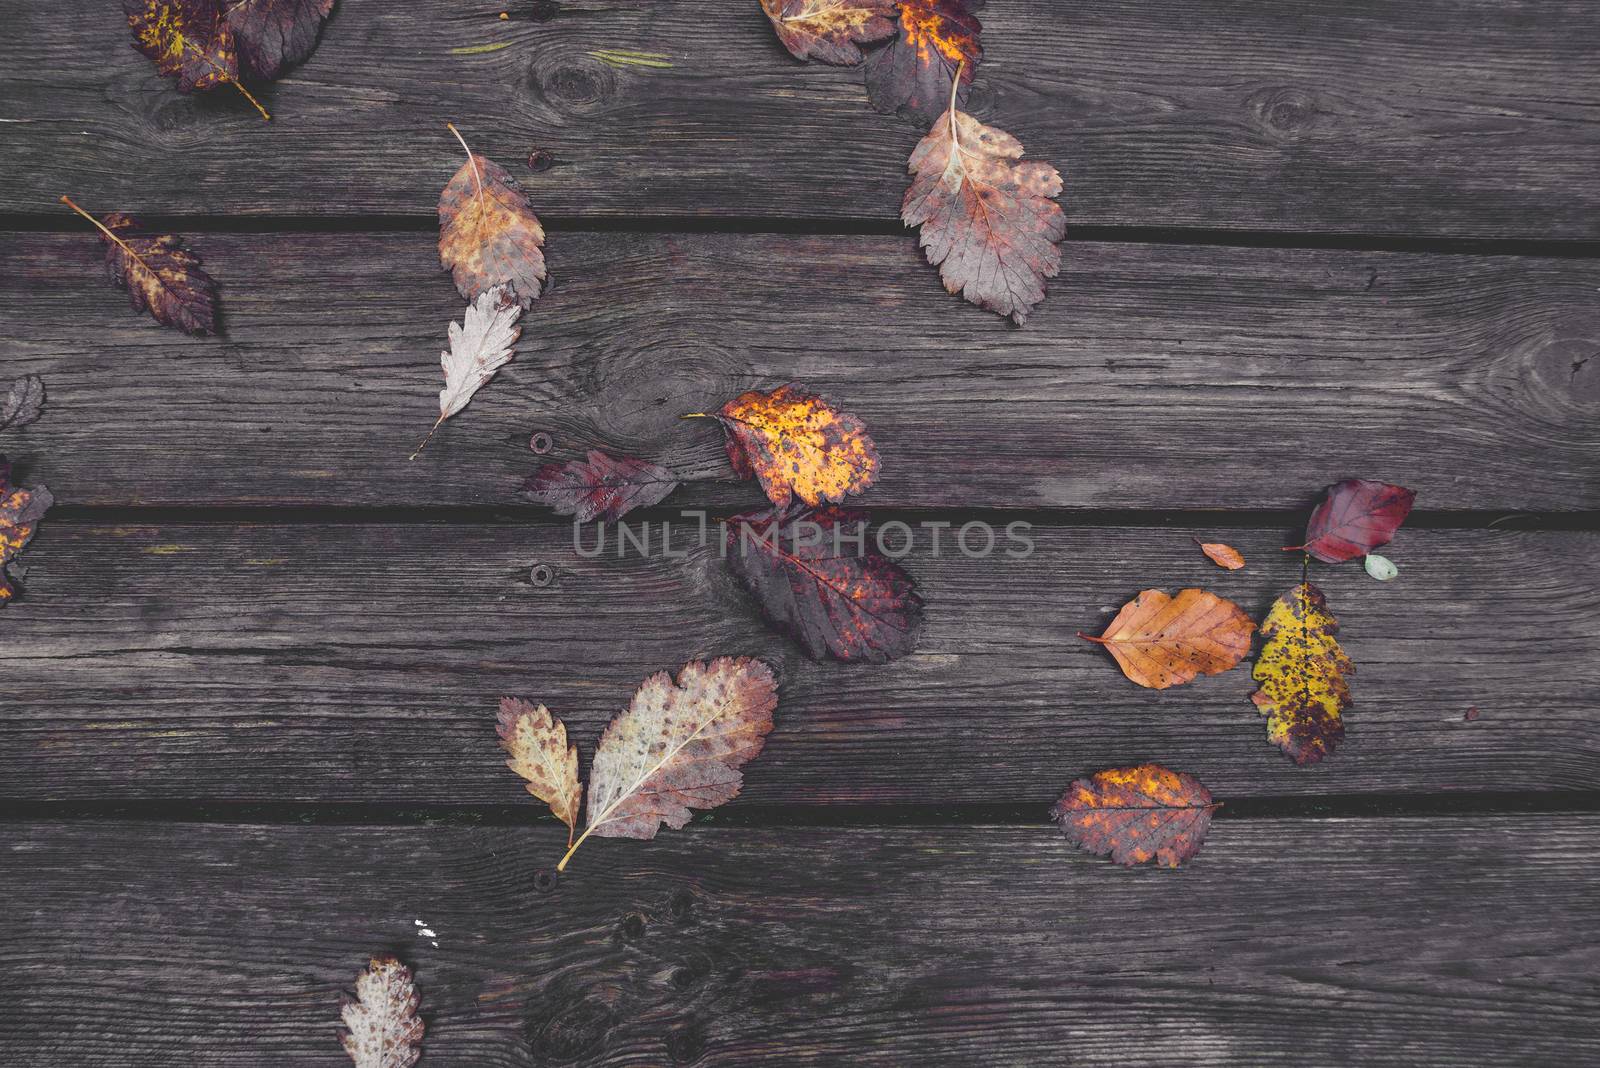 Colorful autumn leaves in the fall on wooden planks in the autumn season in colorful autumn colors from oak and beech trees in the fall in october.